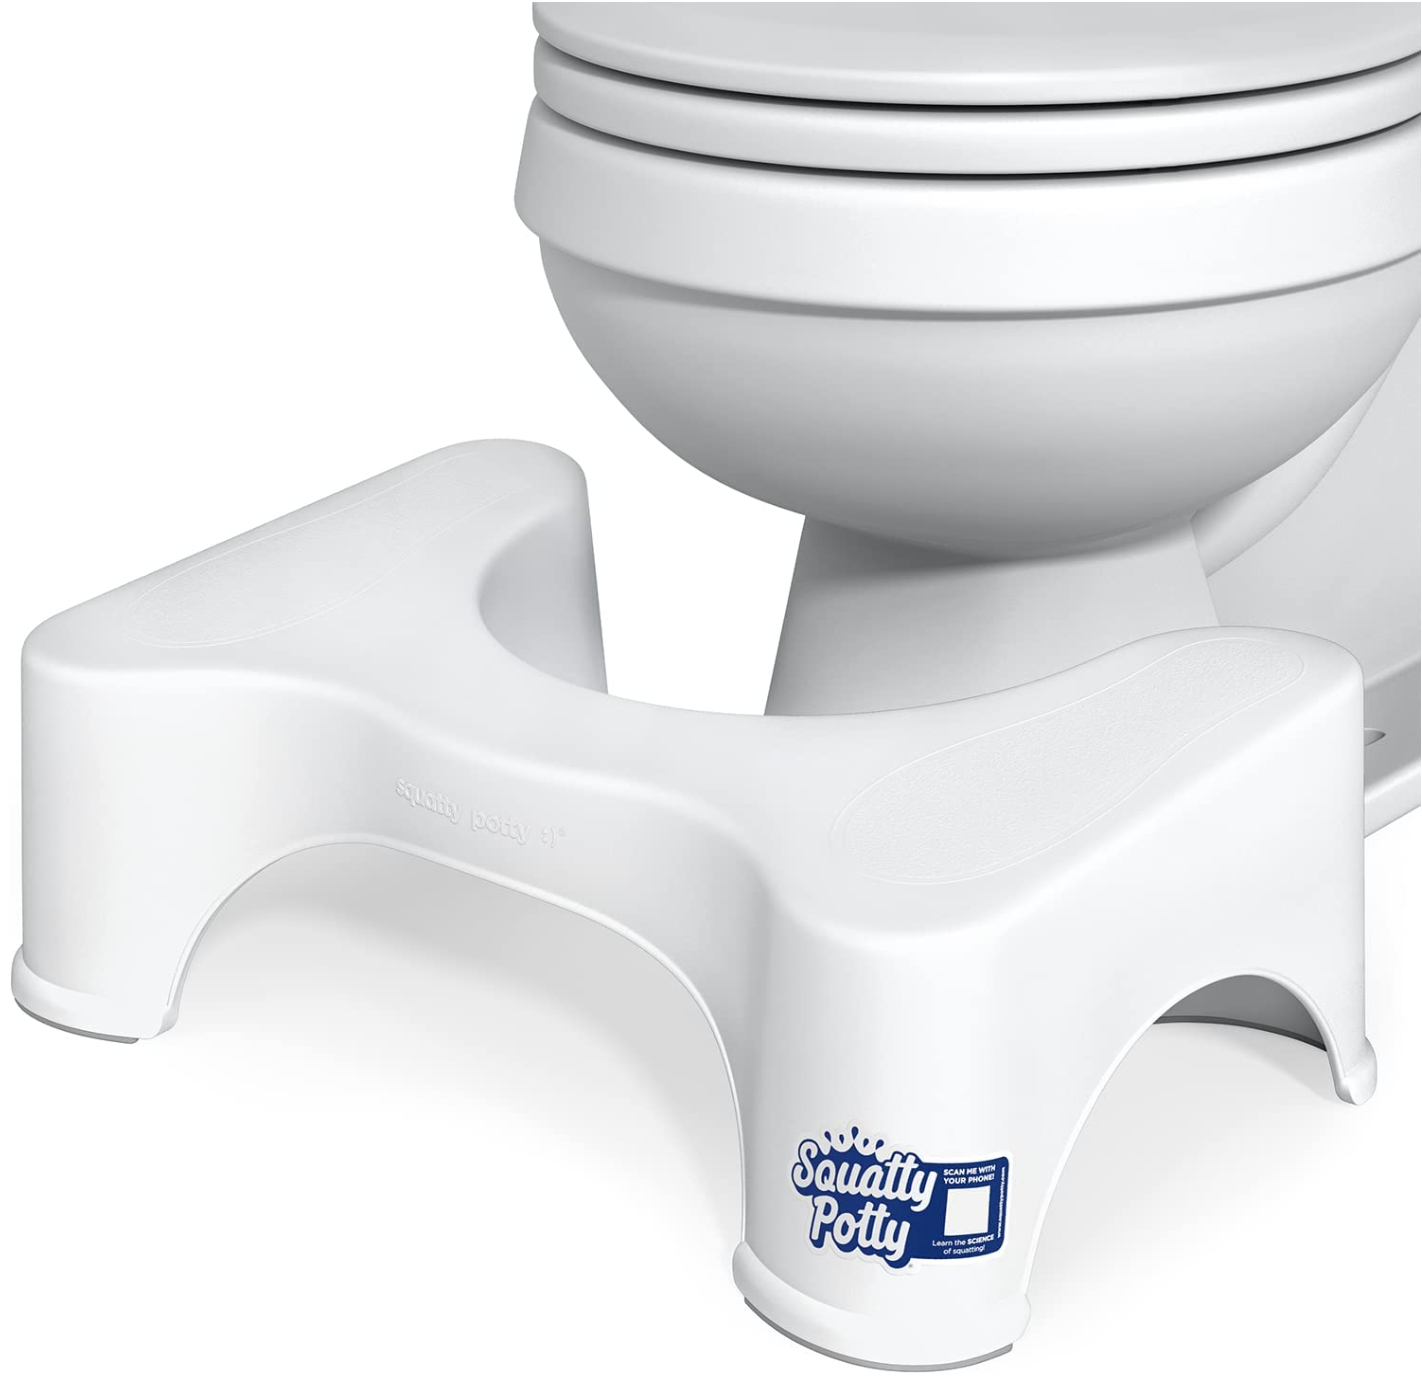 the squatty potty sitting in front of a toilet